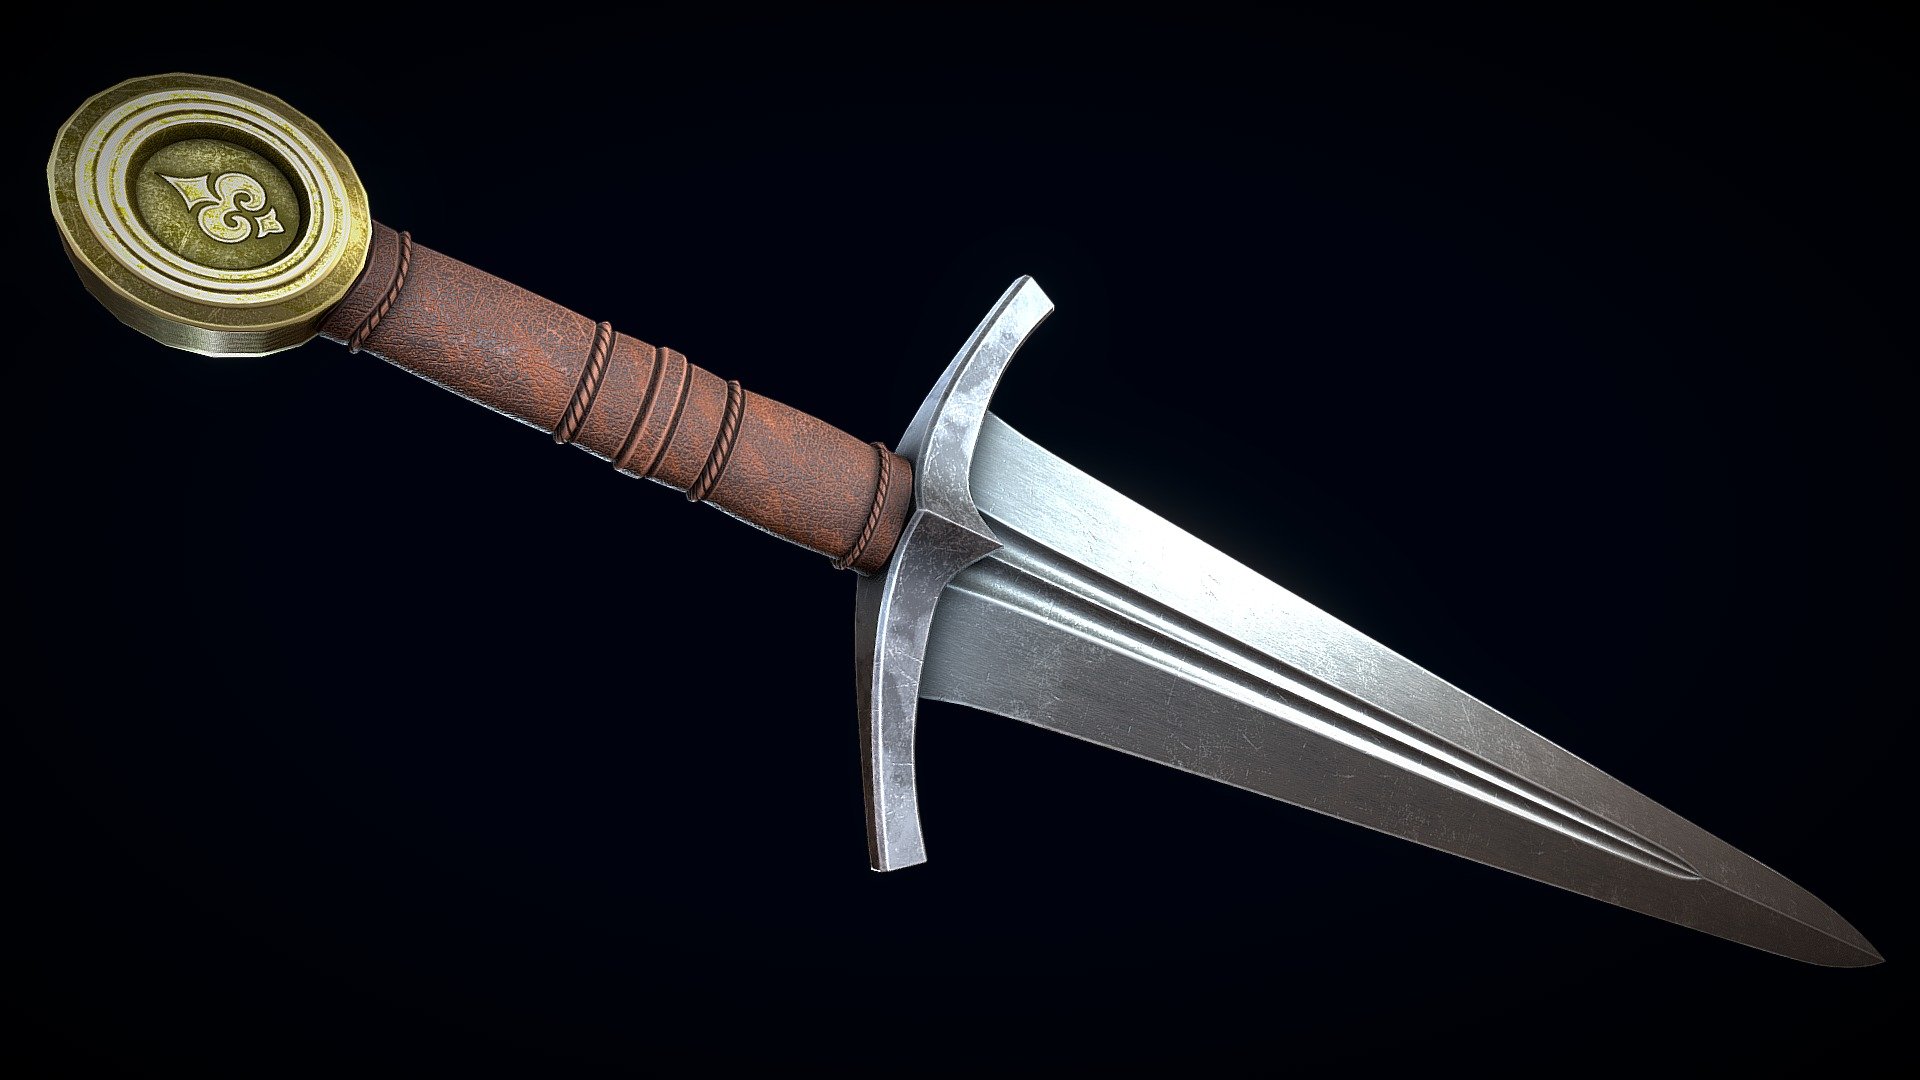 Low-poly 3D model of the Medieval Broadsword doesn't contain any n-gons and has optimal topology. This model has 2K textures 3d model